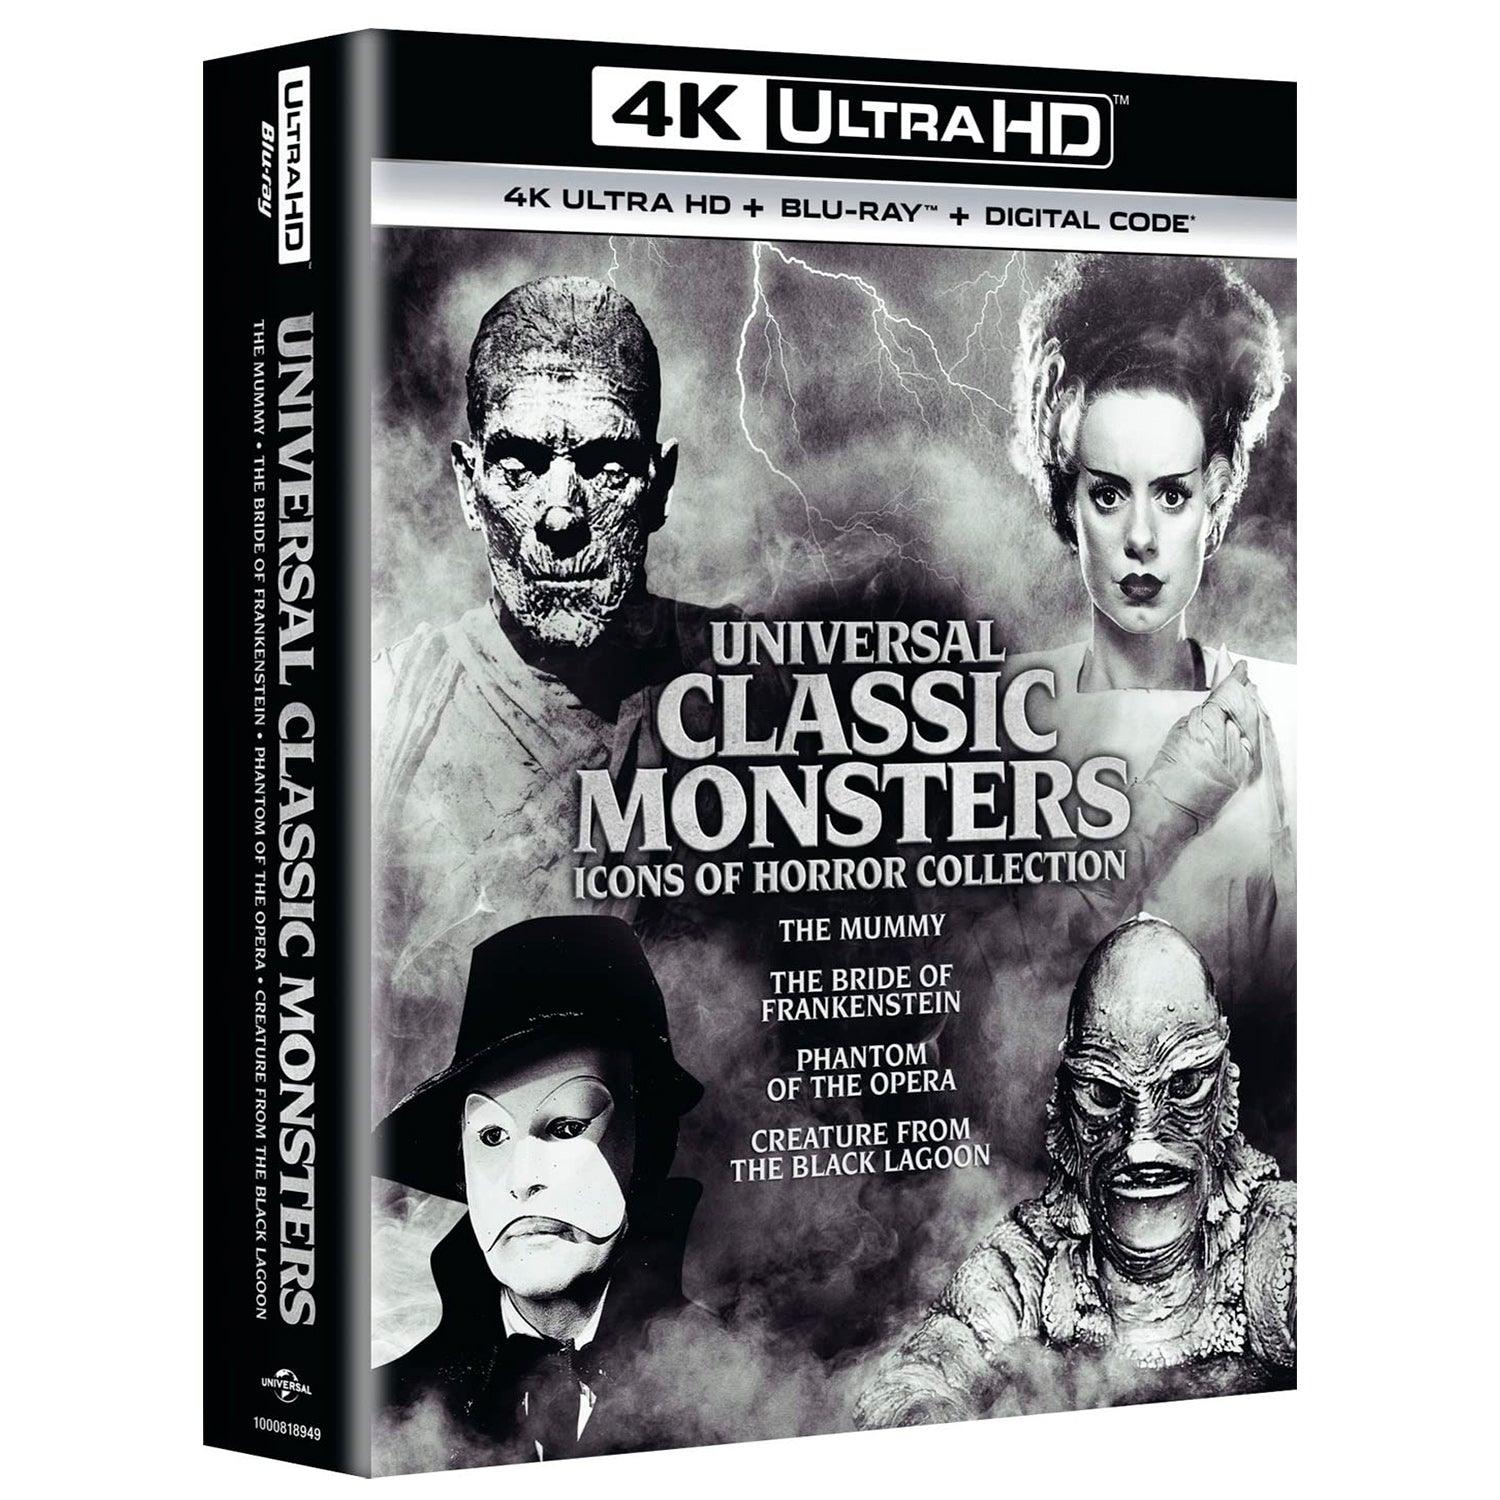 Universal Classic Monsters Icons of Horror Collection Vol. 2 (англ. язык) (4K UHD + Blu-ray)